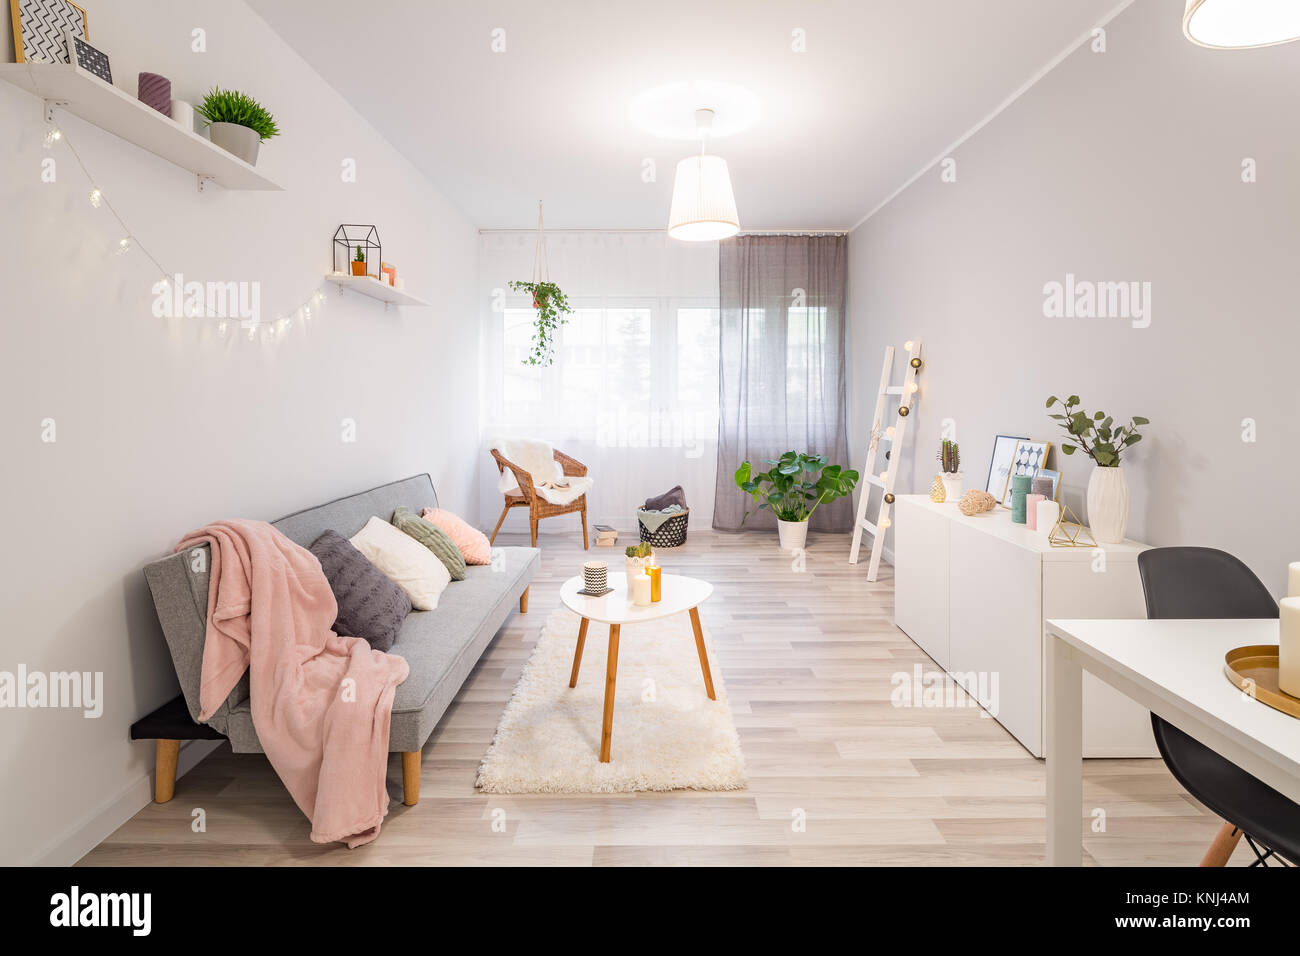 https://c8.alamy.com/comp/KNJ4AM/nordic-style-living-room-with-couch-cabinet-and-coffee-table-KNJ4AM.jpg